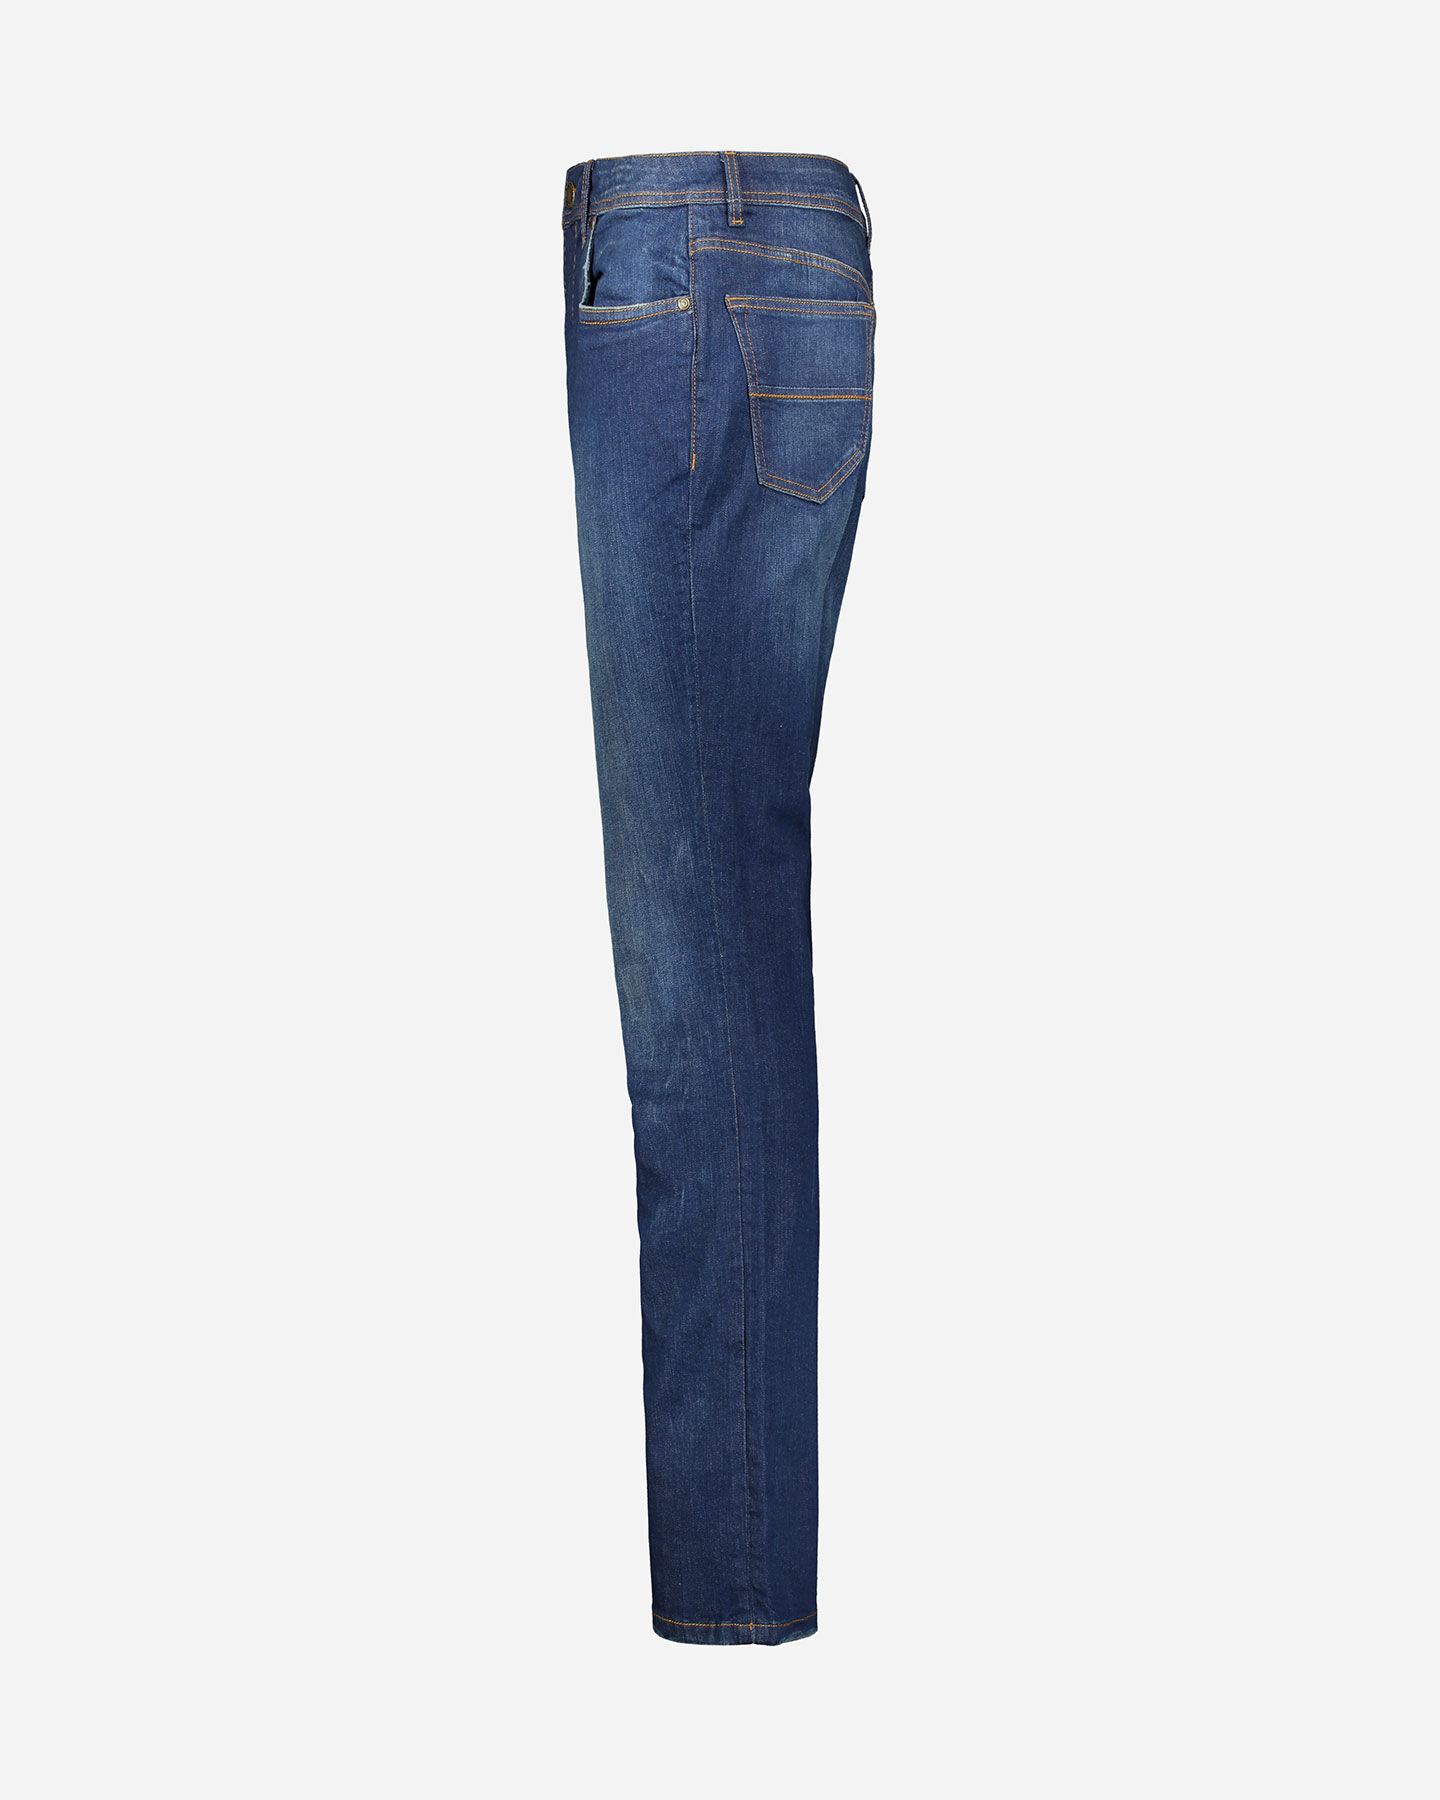  Jeans DACK'S REGULAR M S4074141|DD|46 scatto 1